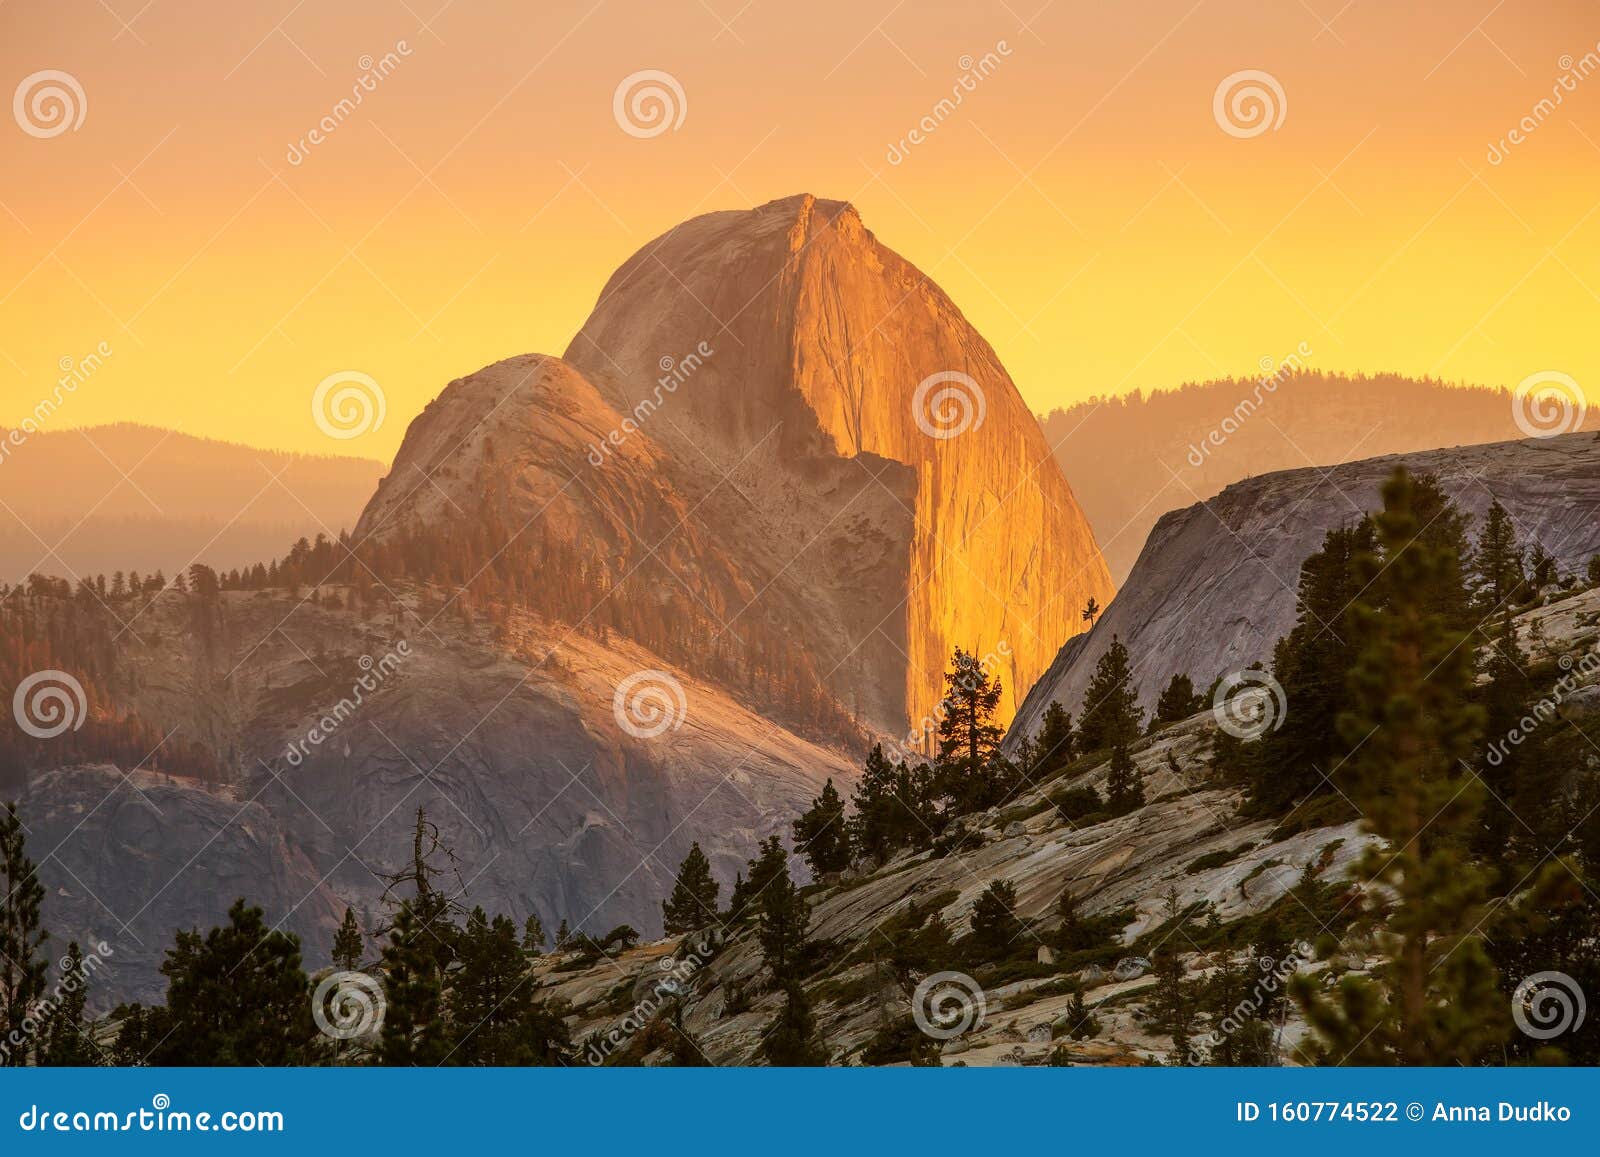 spectacular views of the yosemite national park in autumn, calif